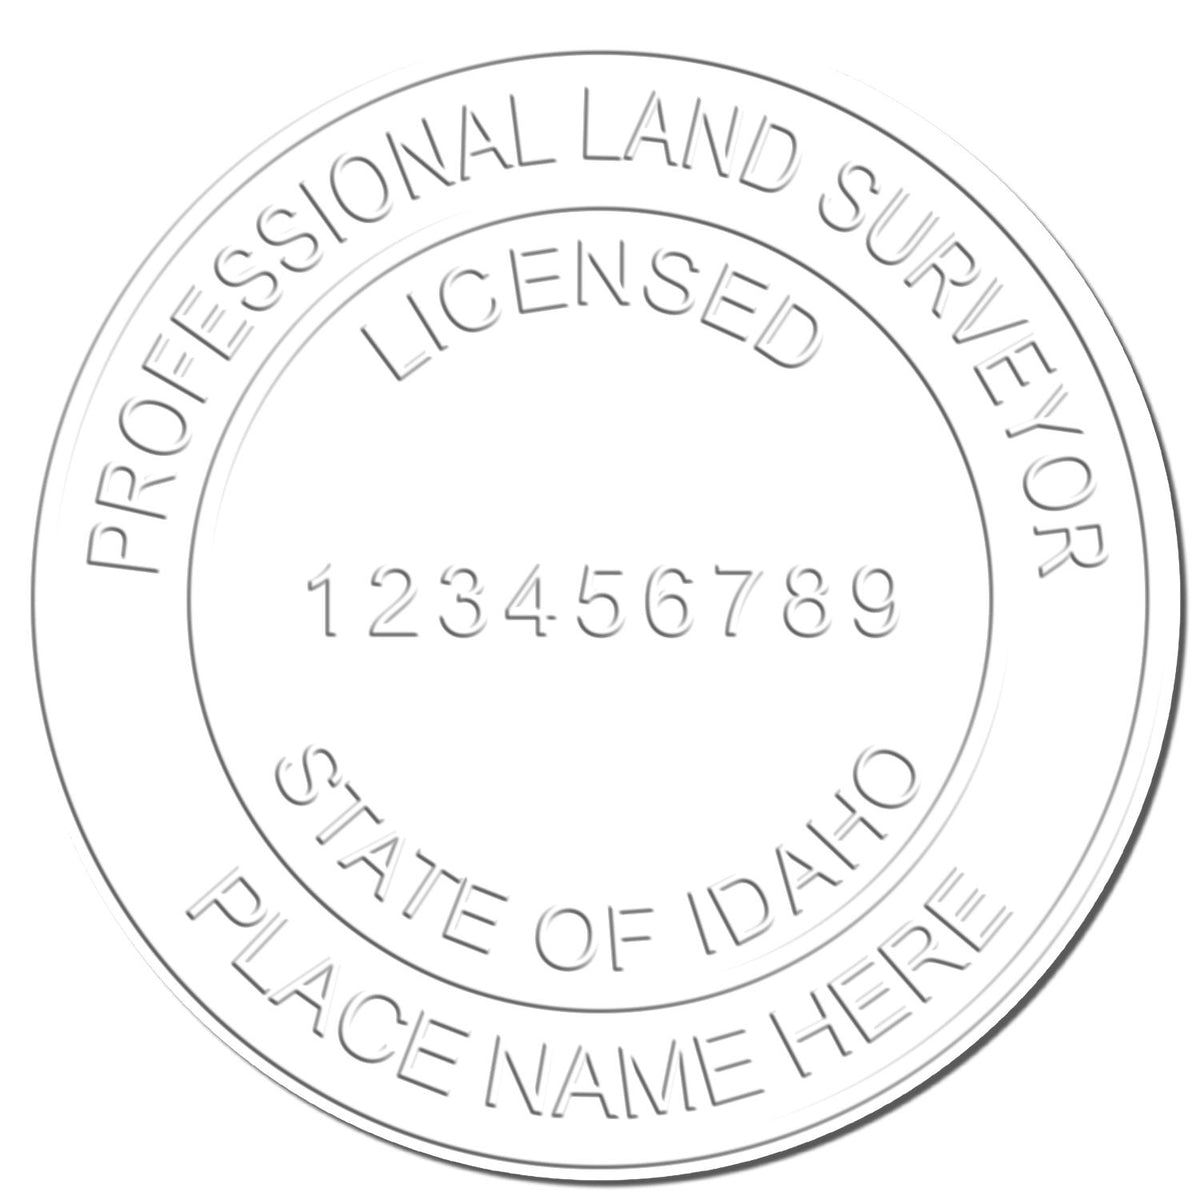 This paper is stamped with a sample imprint of the State of Idaho Soft Land Surveyor Embossing Seal, signifying its quality and reliability.